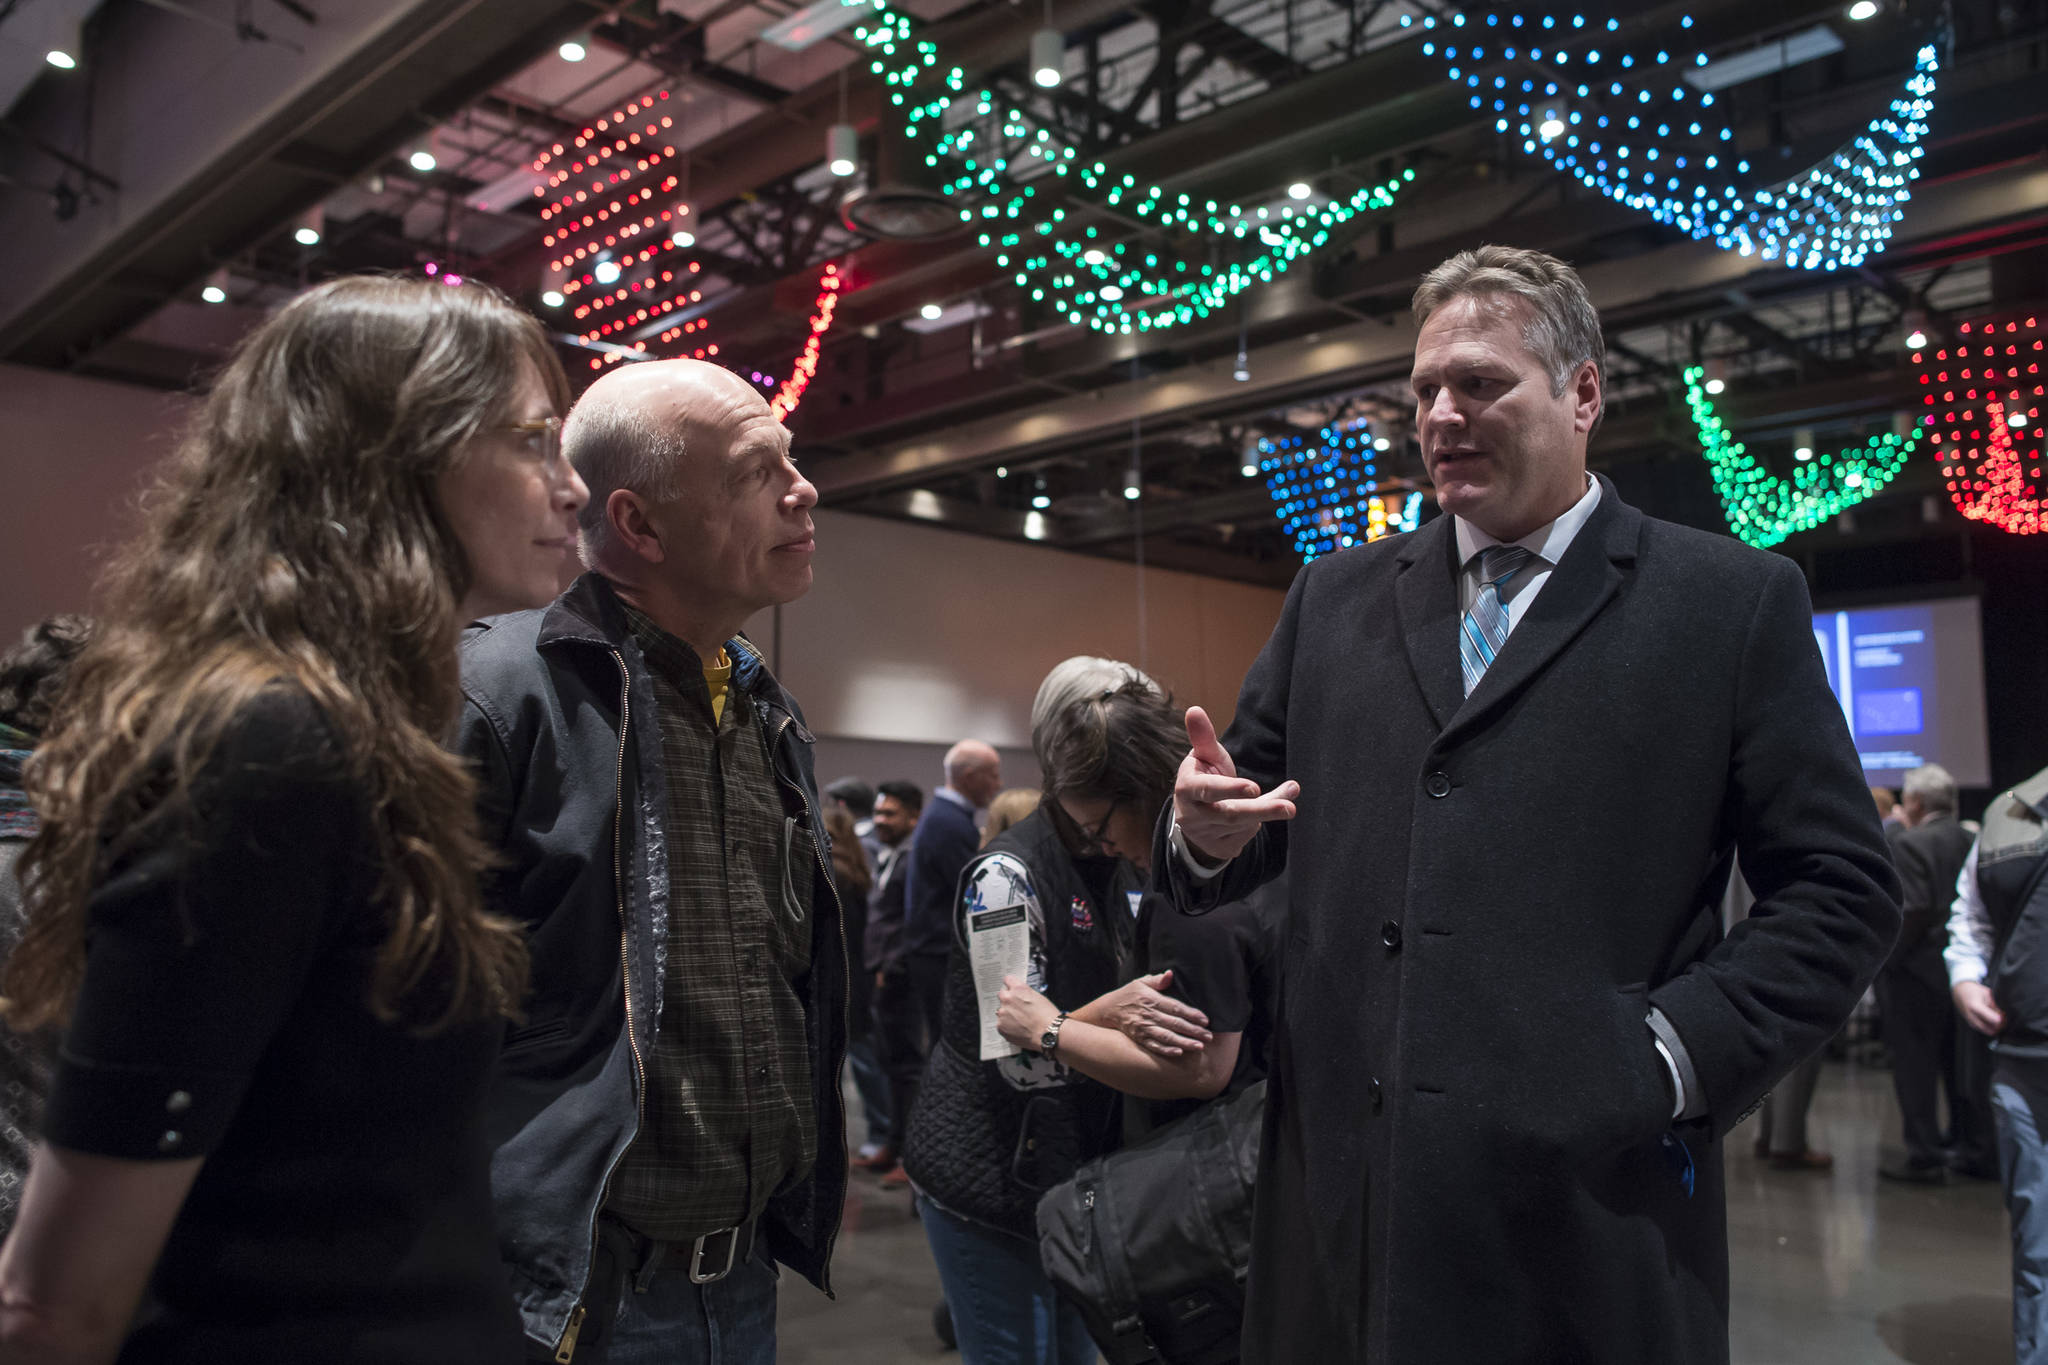 In this file photo, Irene Gallion and Eric Nelson meet with Gov. Michael J. Dunleavy at the 34th Annual Community Welcome Reception at Centennial Hall on Wednesday, Jan. 16, 2019. (Michael Penn | Juneau Empire File)